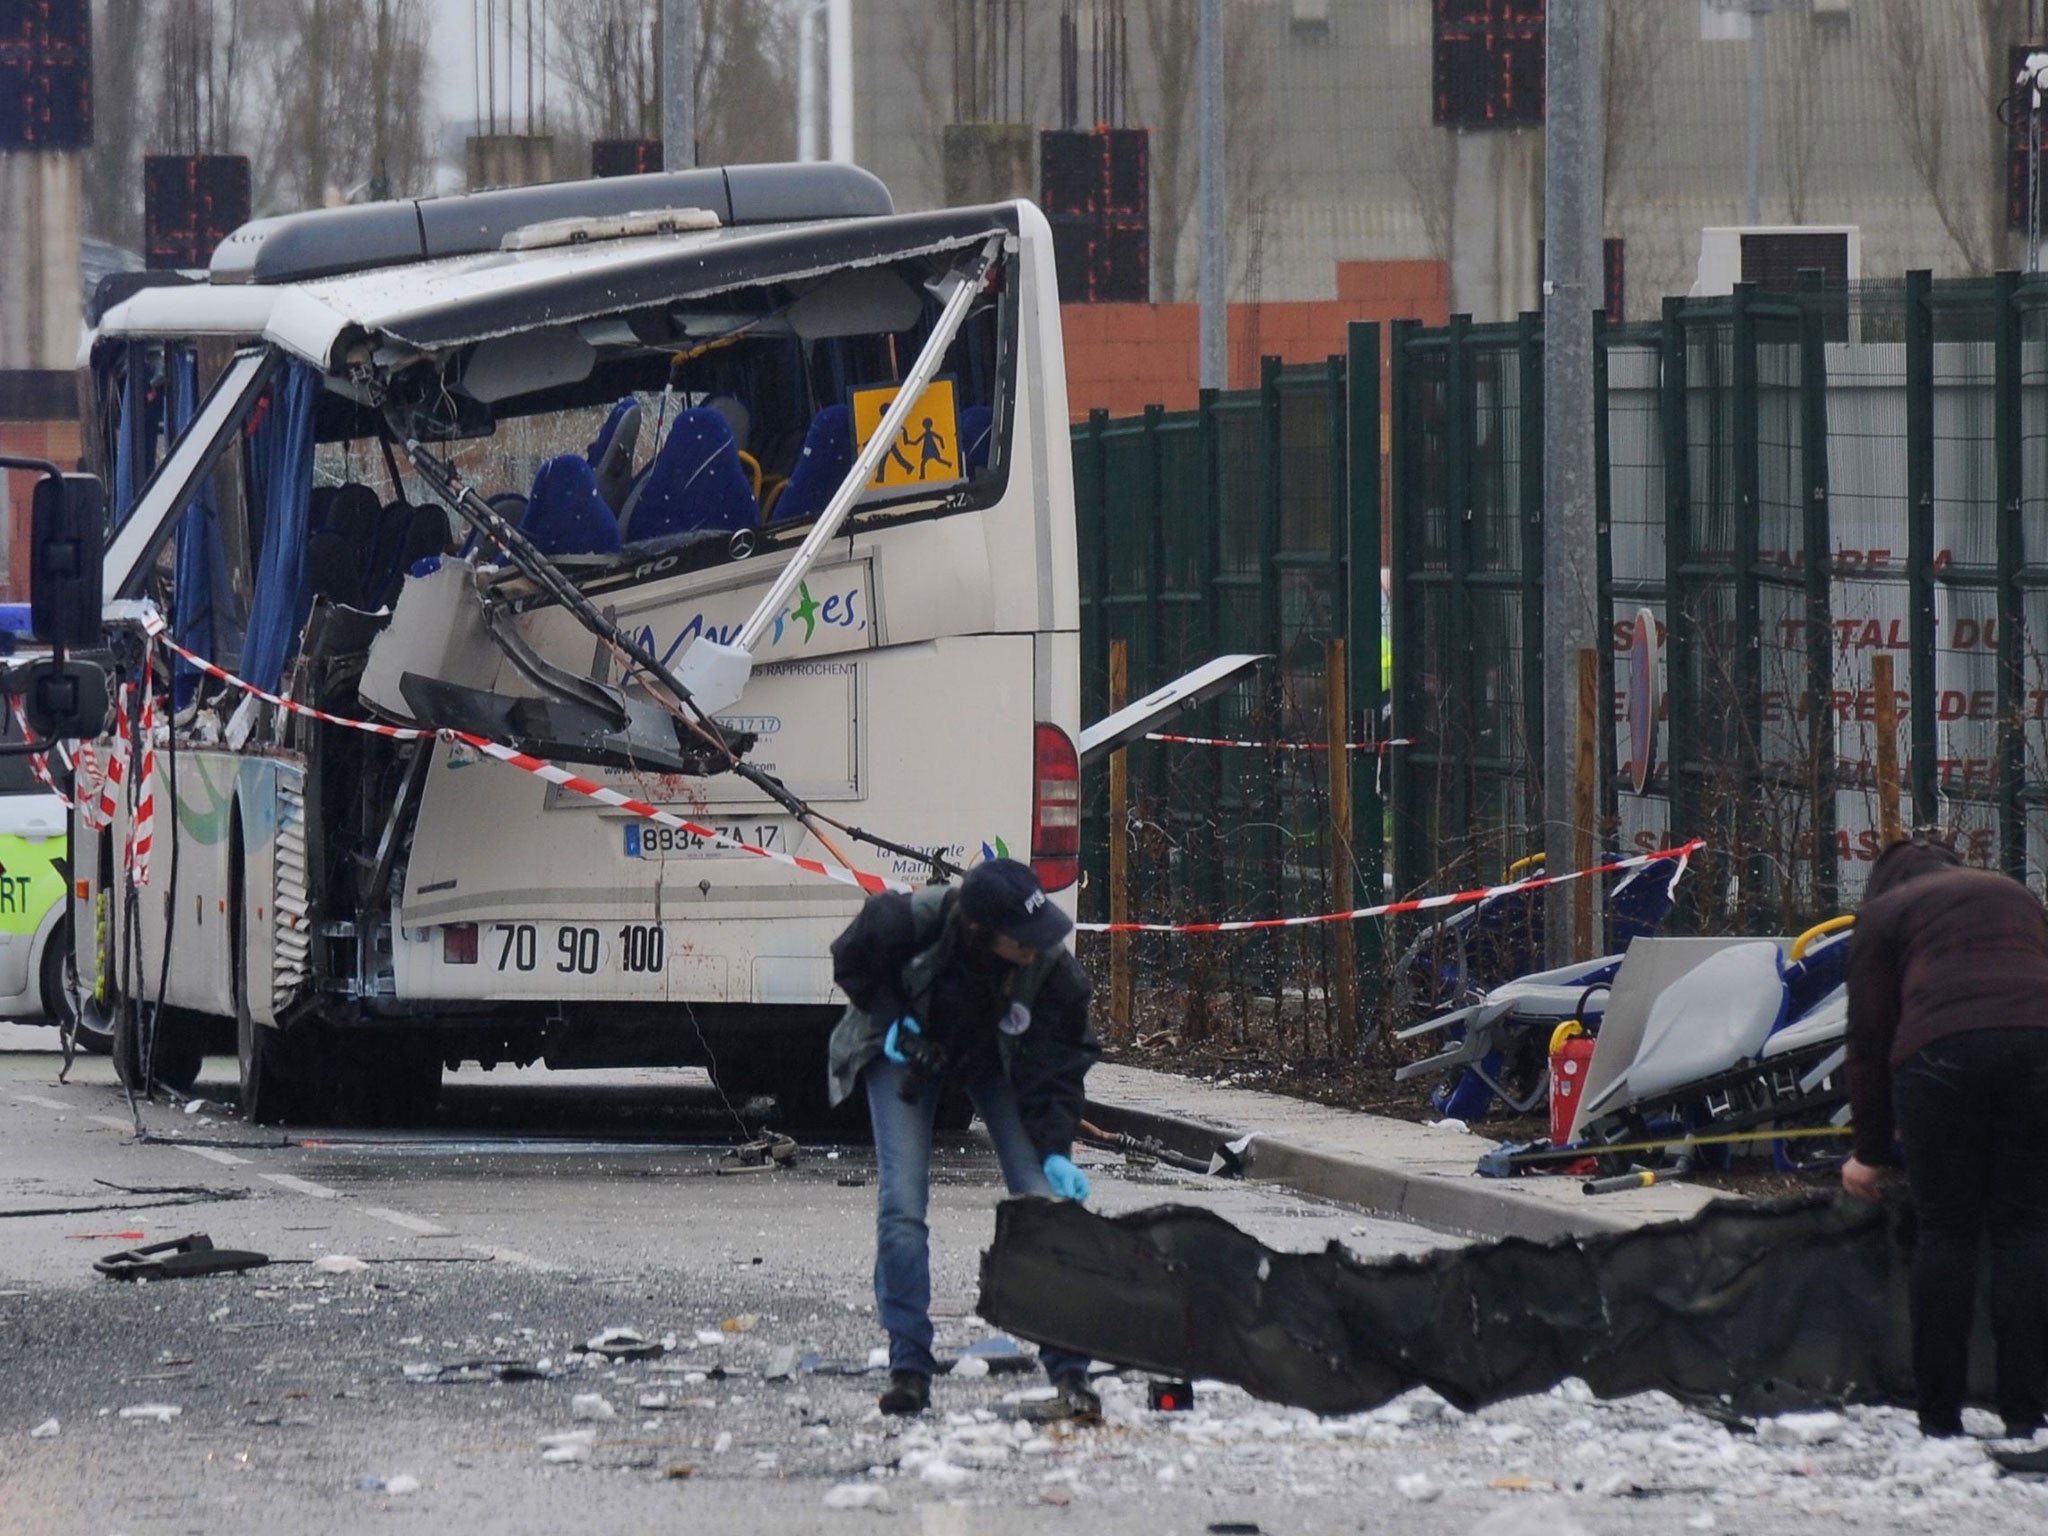 French forensic police work near the wreckage of a school minibus after it crashed into a truck near Rochefort on February 11